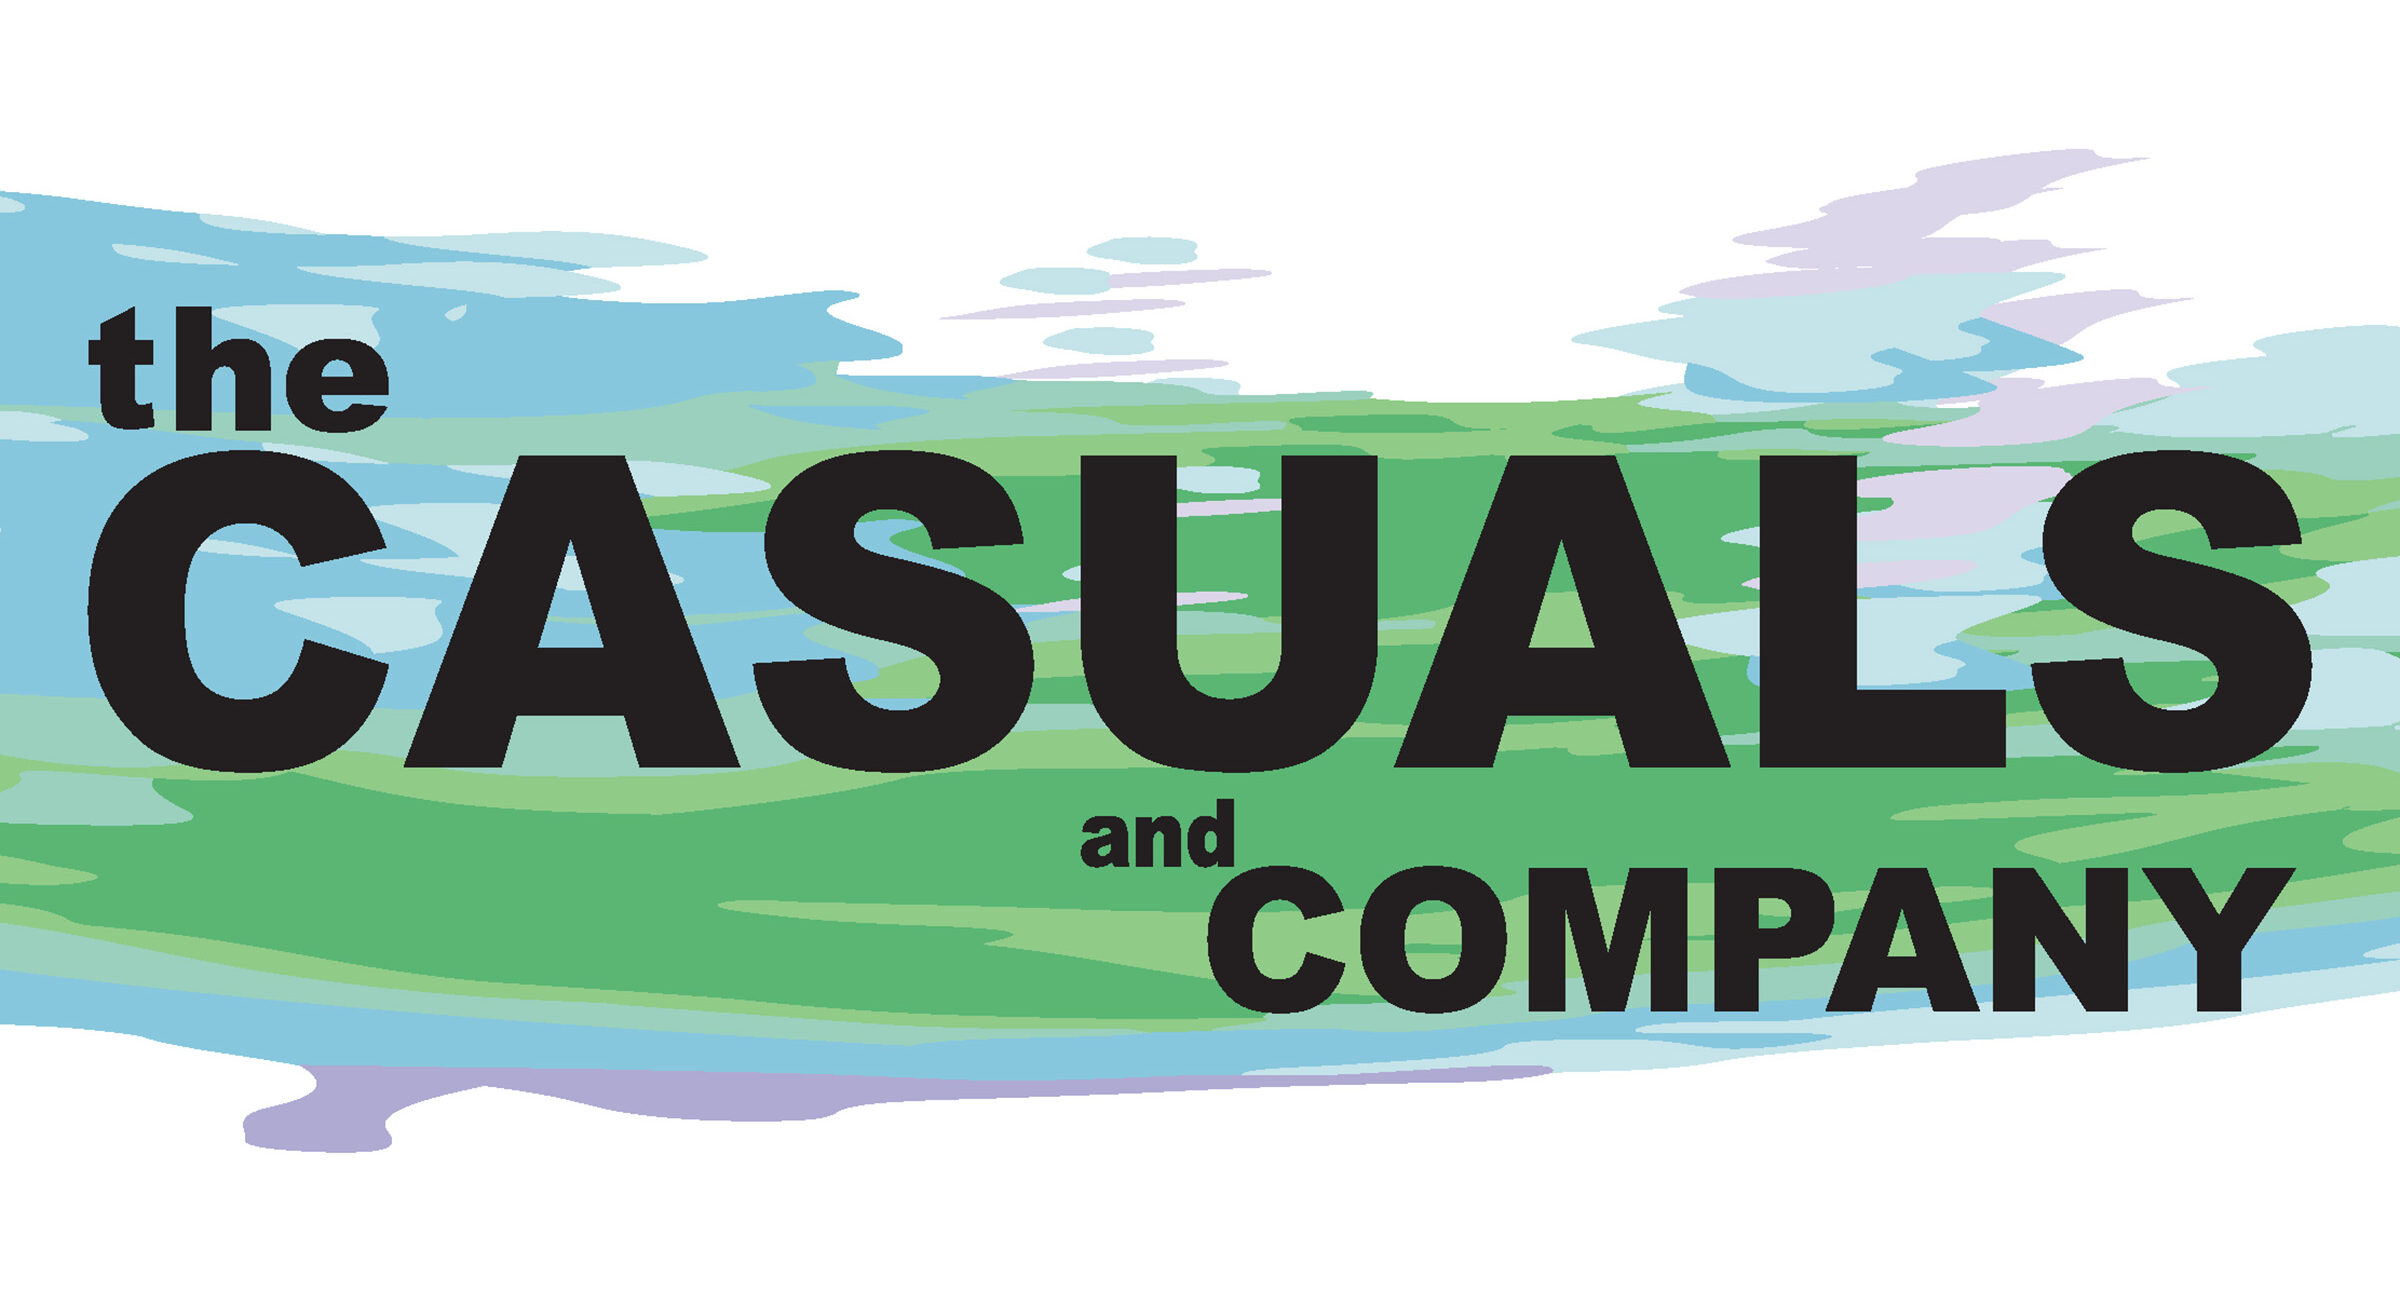 The original logo for The Casuals and Company